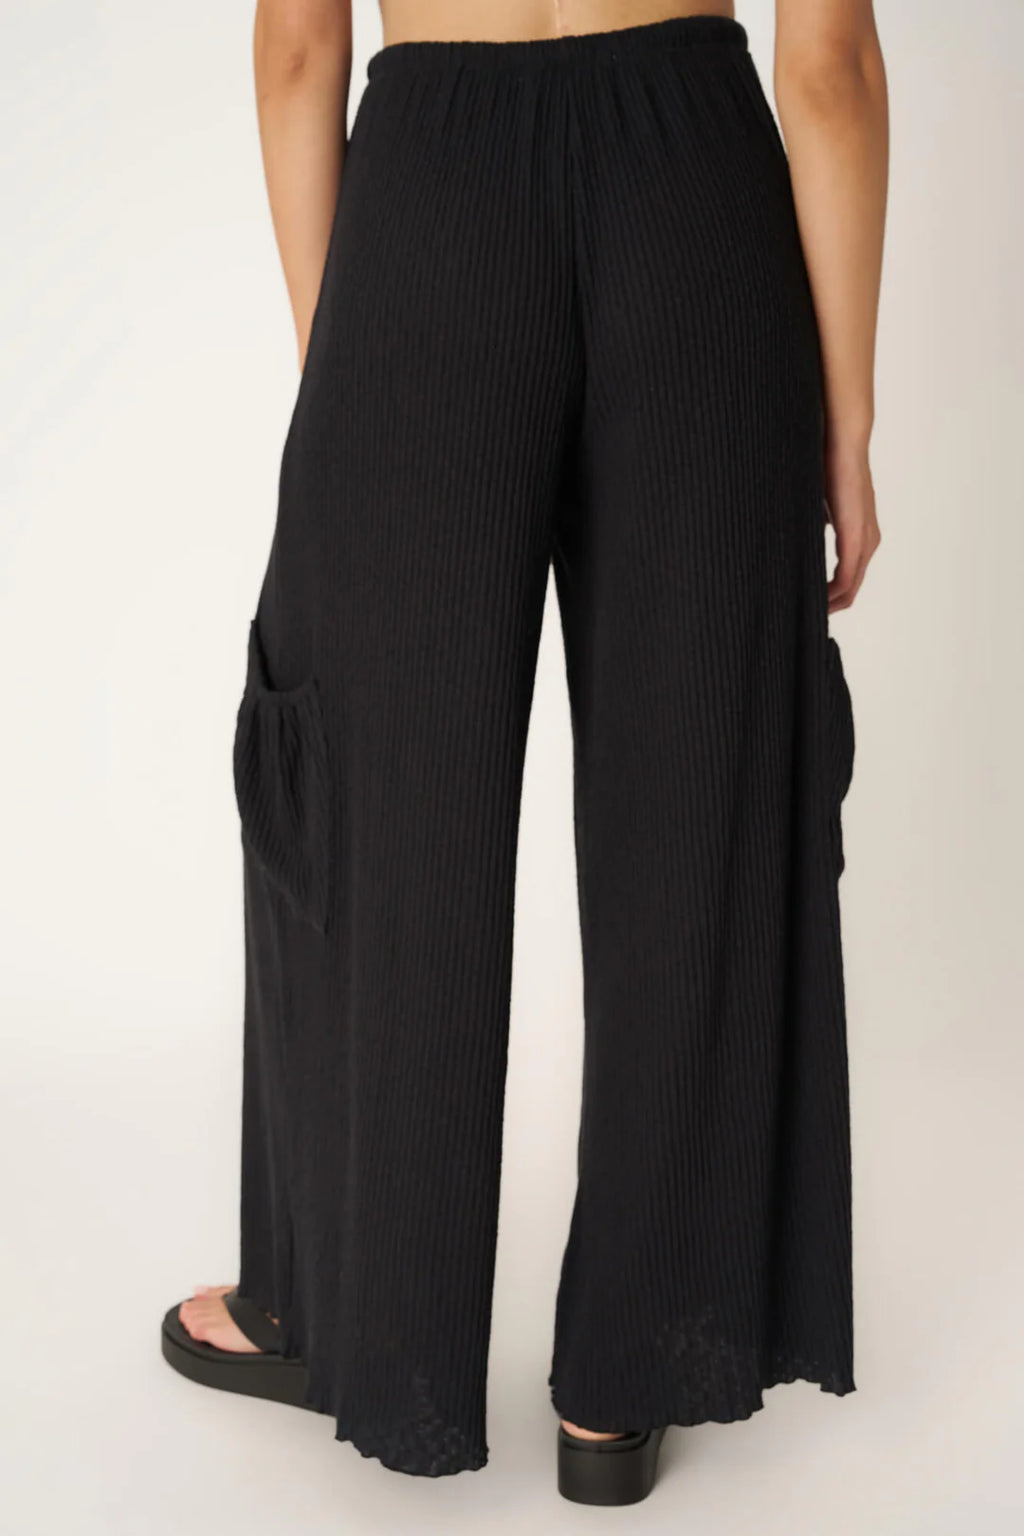 Never Better Textured Pant